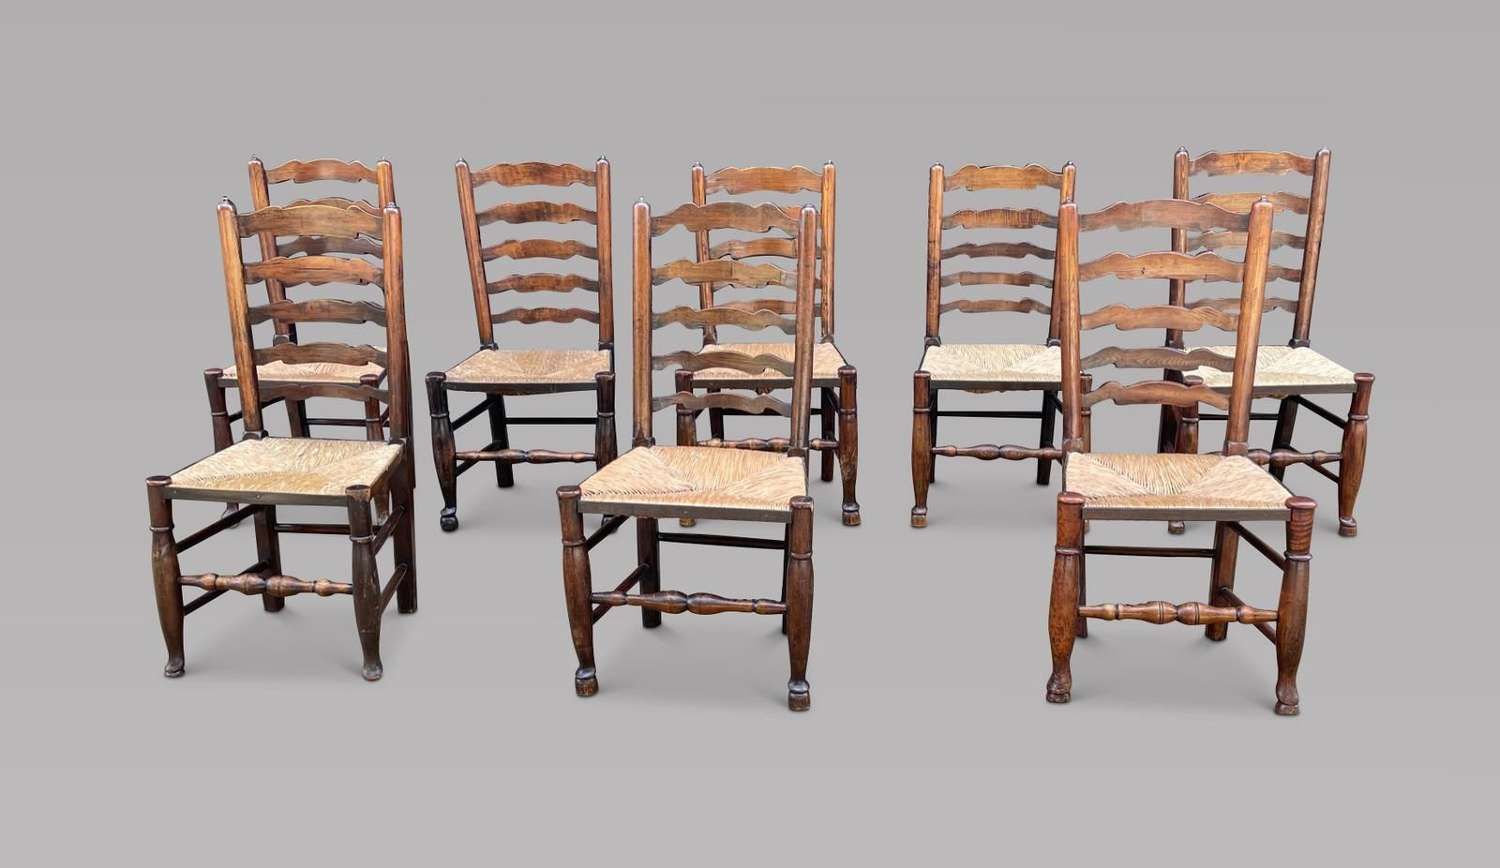 Set of Eight Ladder-back Chairs c.1900